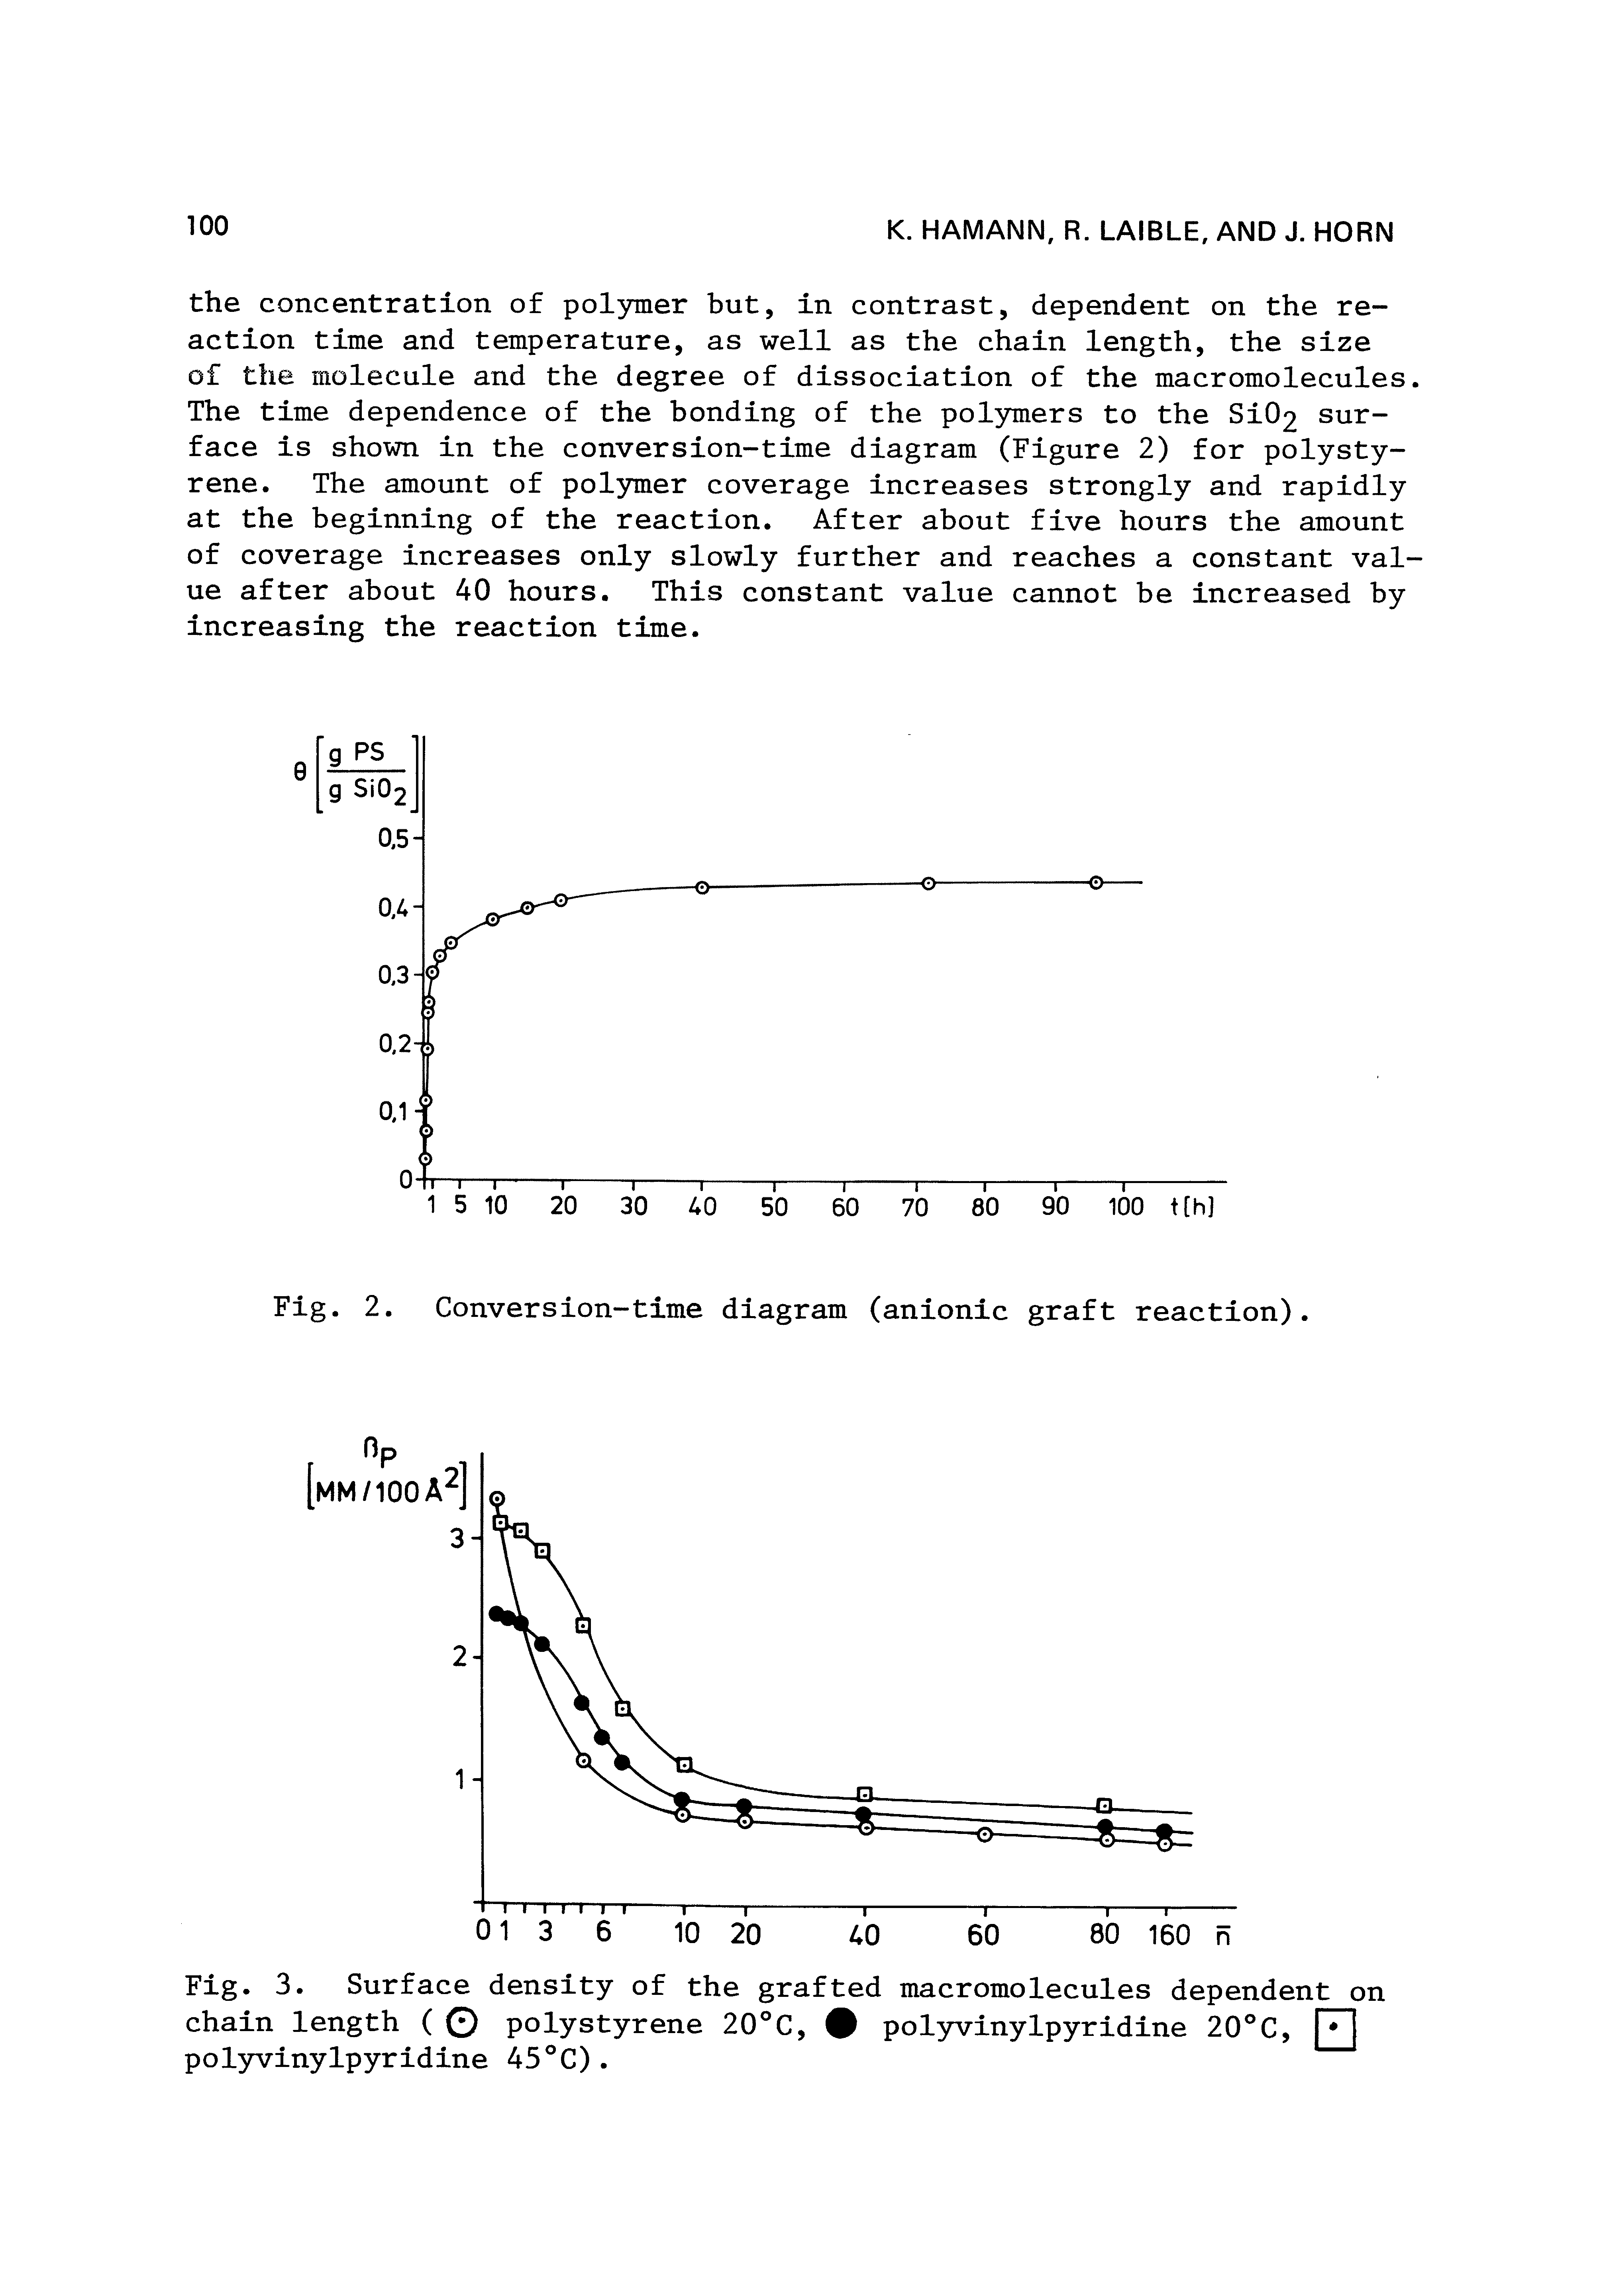 Fig. 2. Conversion-time diagram (anionic graft reaction).